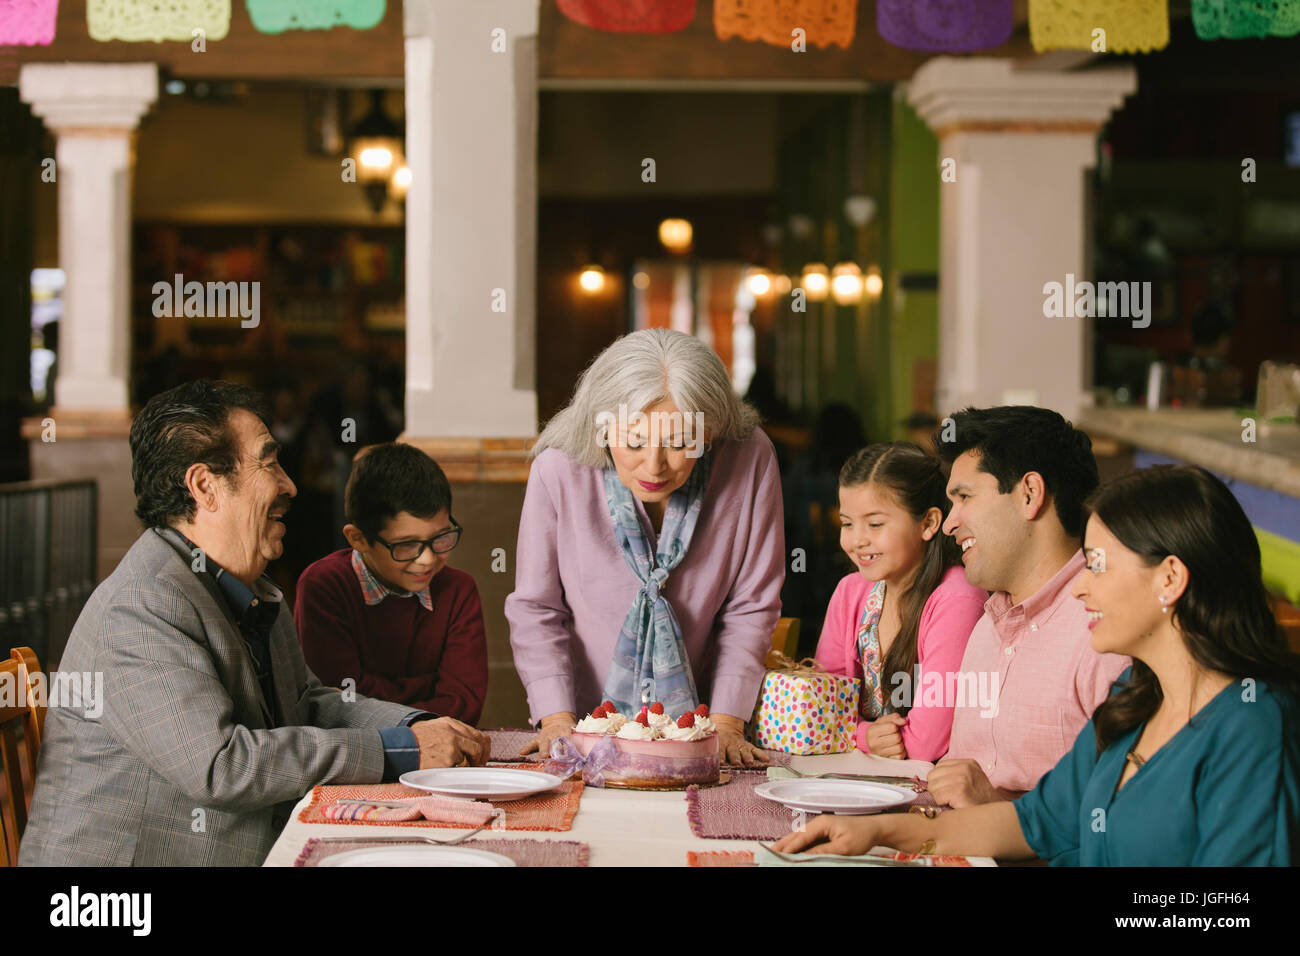 Older woman blowing out candles on birthday cake in restaurant Stock Photo